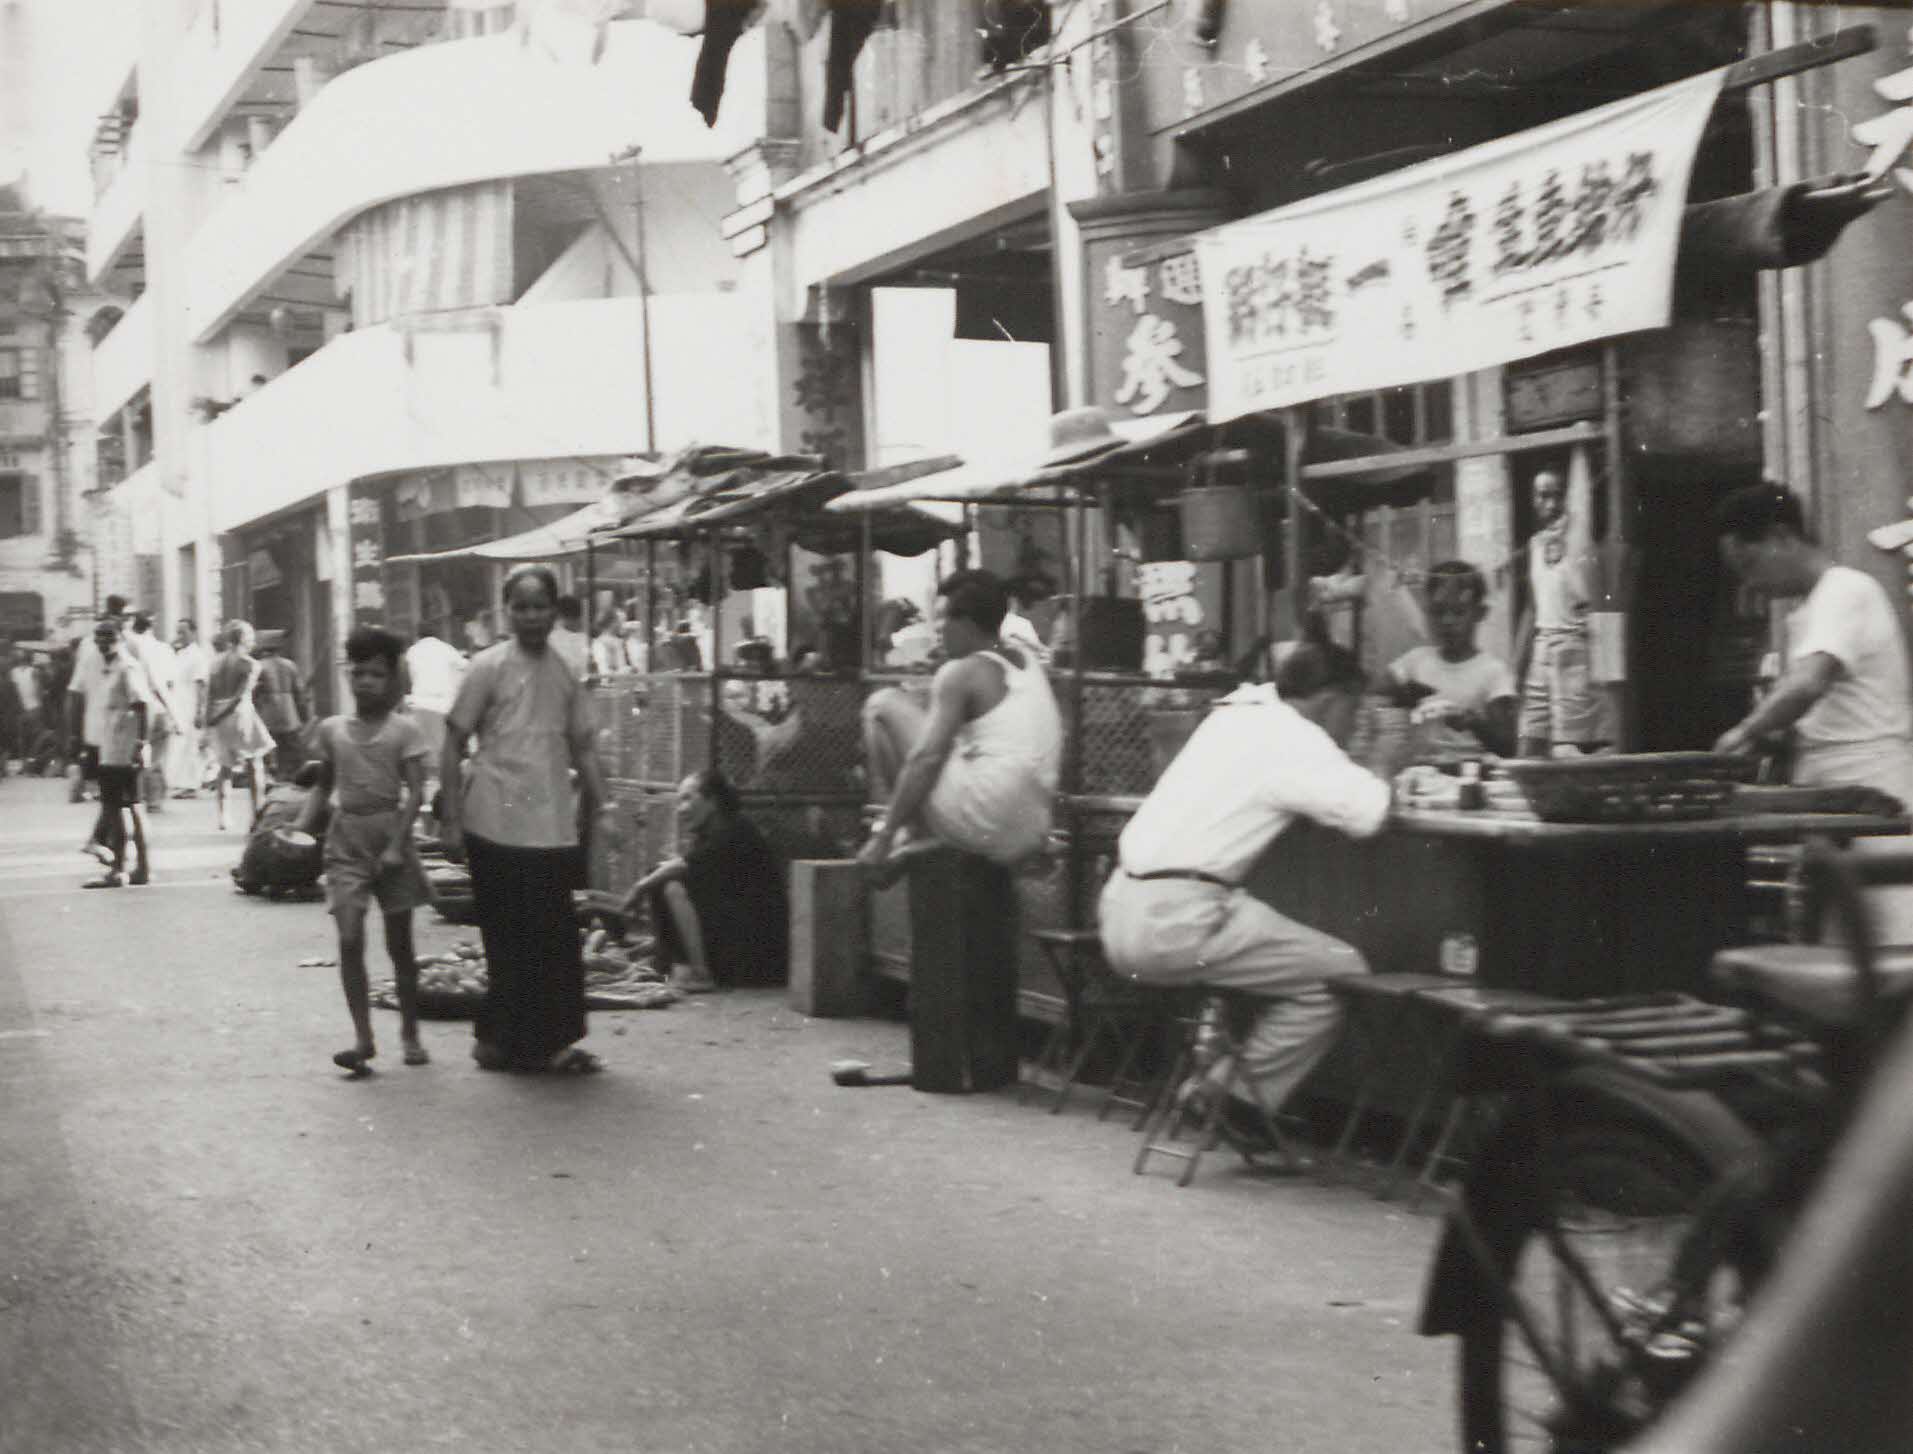 Street market and hawkers, 1950s